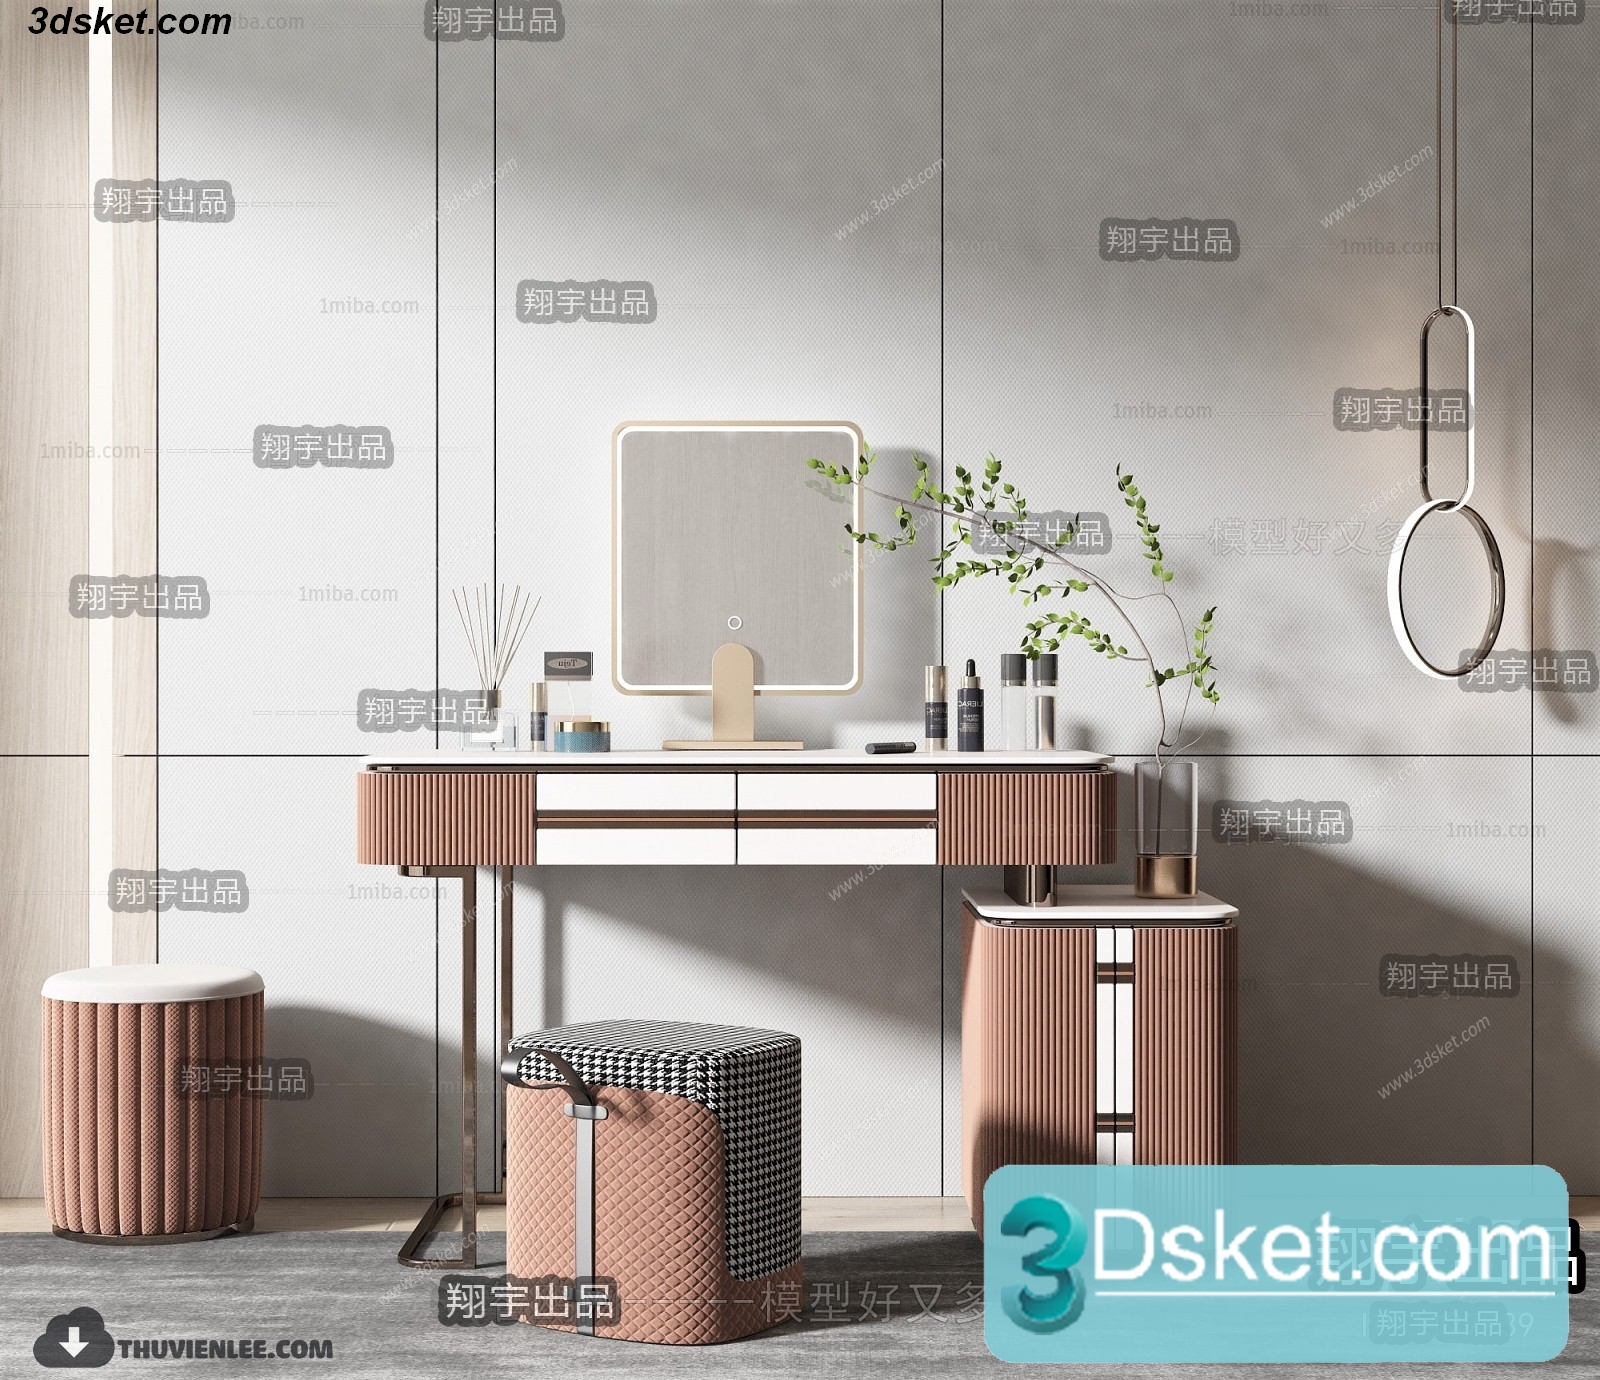 3D Model Dressing Table Free Download 010